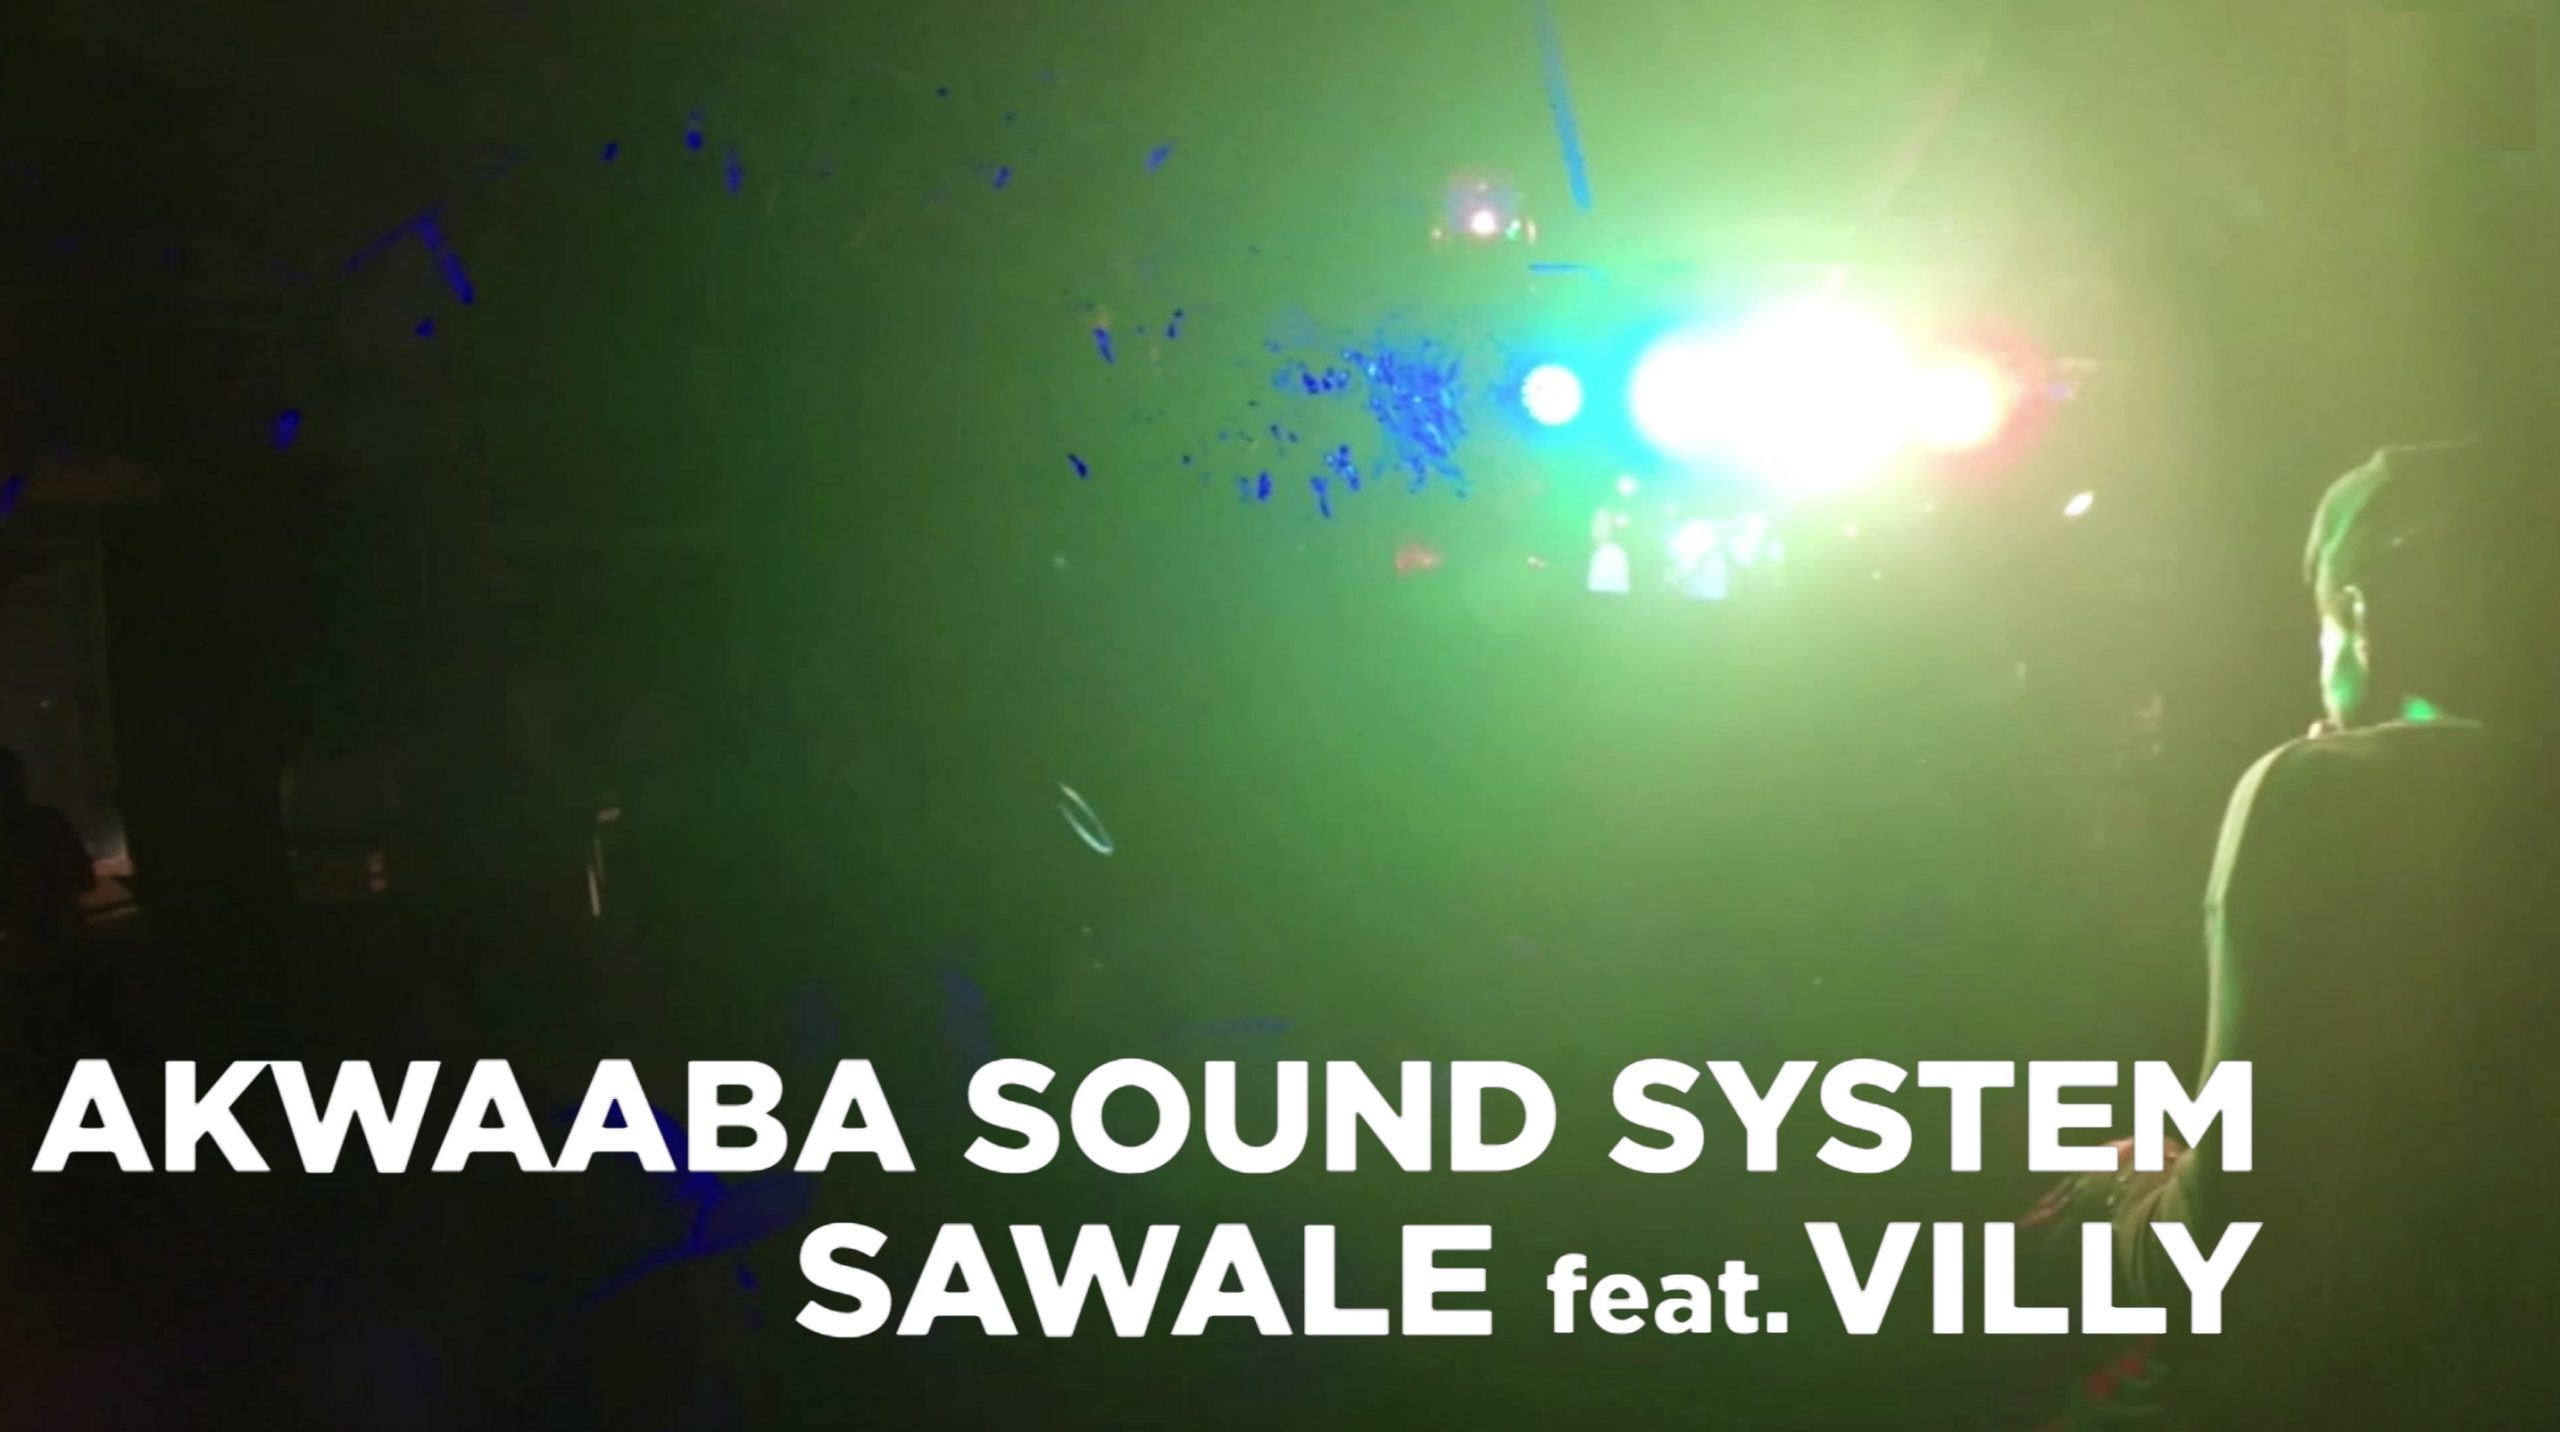 Akwaaba Sound System feat. Villy – “Sawale”